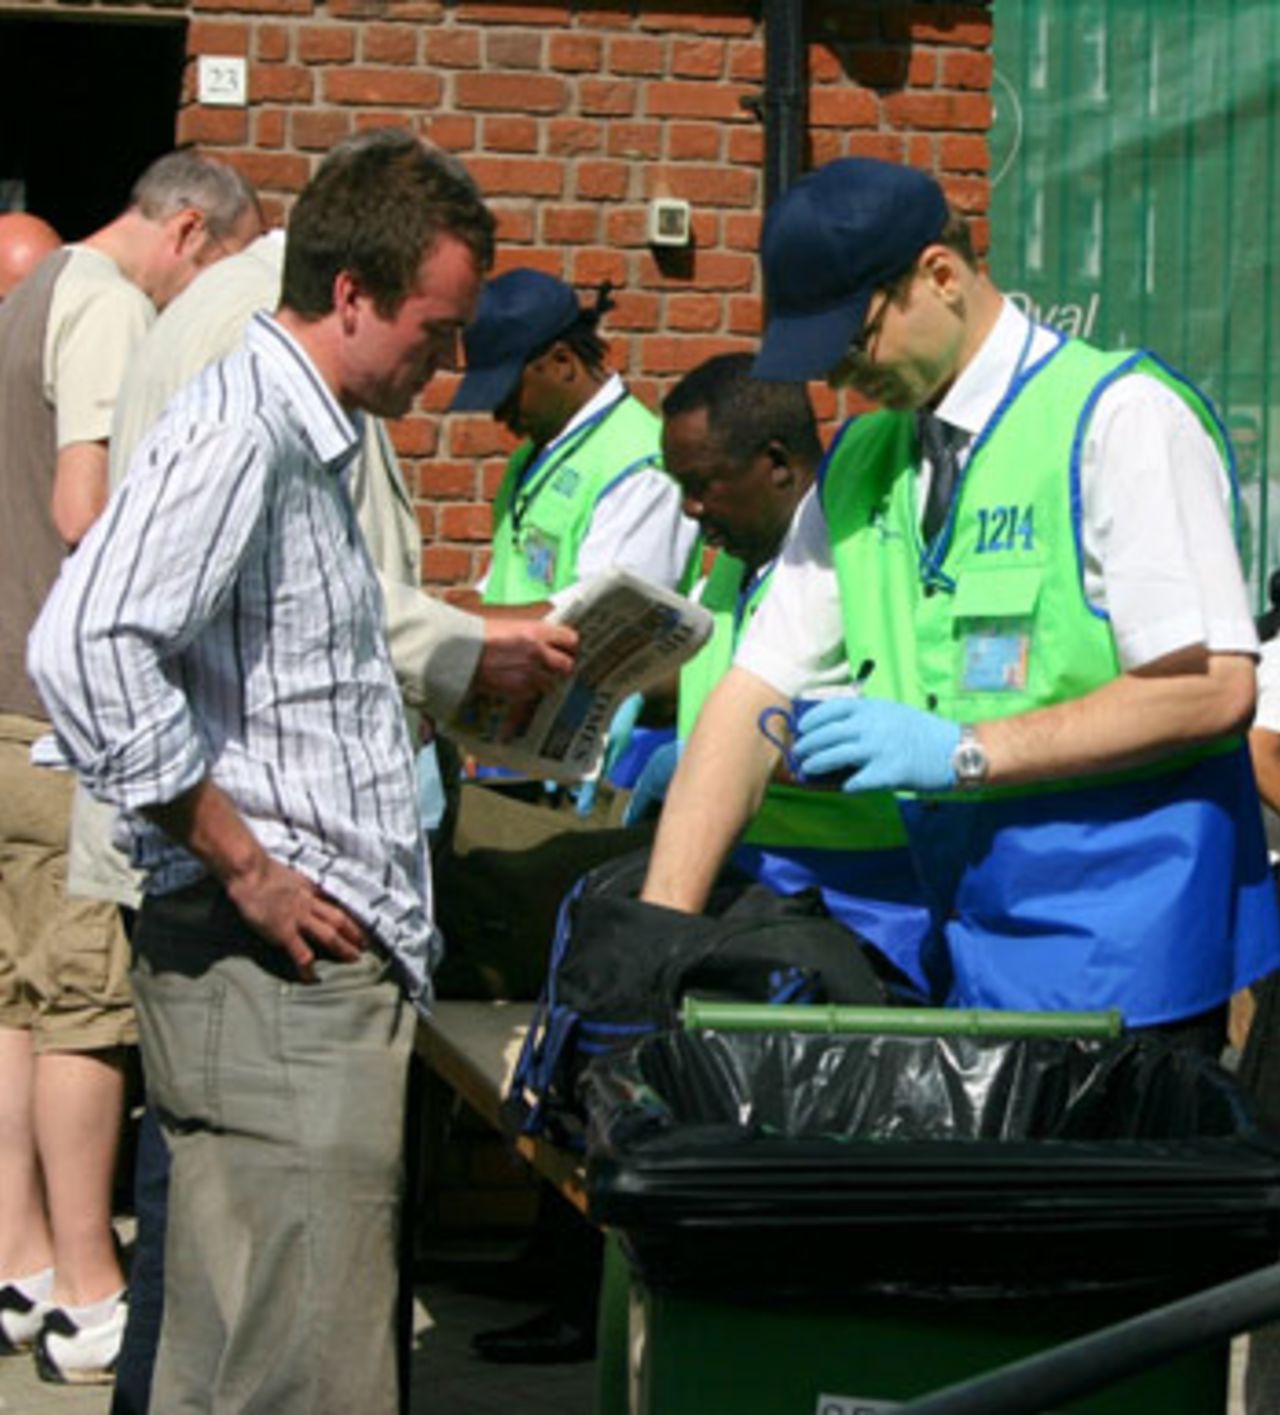 Stewards at The Oval prevent a spectator from bringing in a cup, England v Sri Lanka, The Oval, June 20, 2006